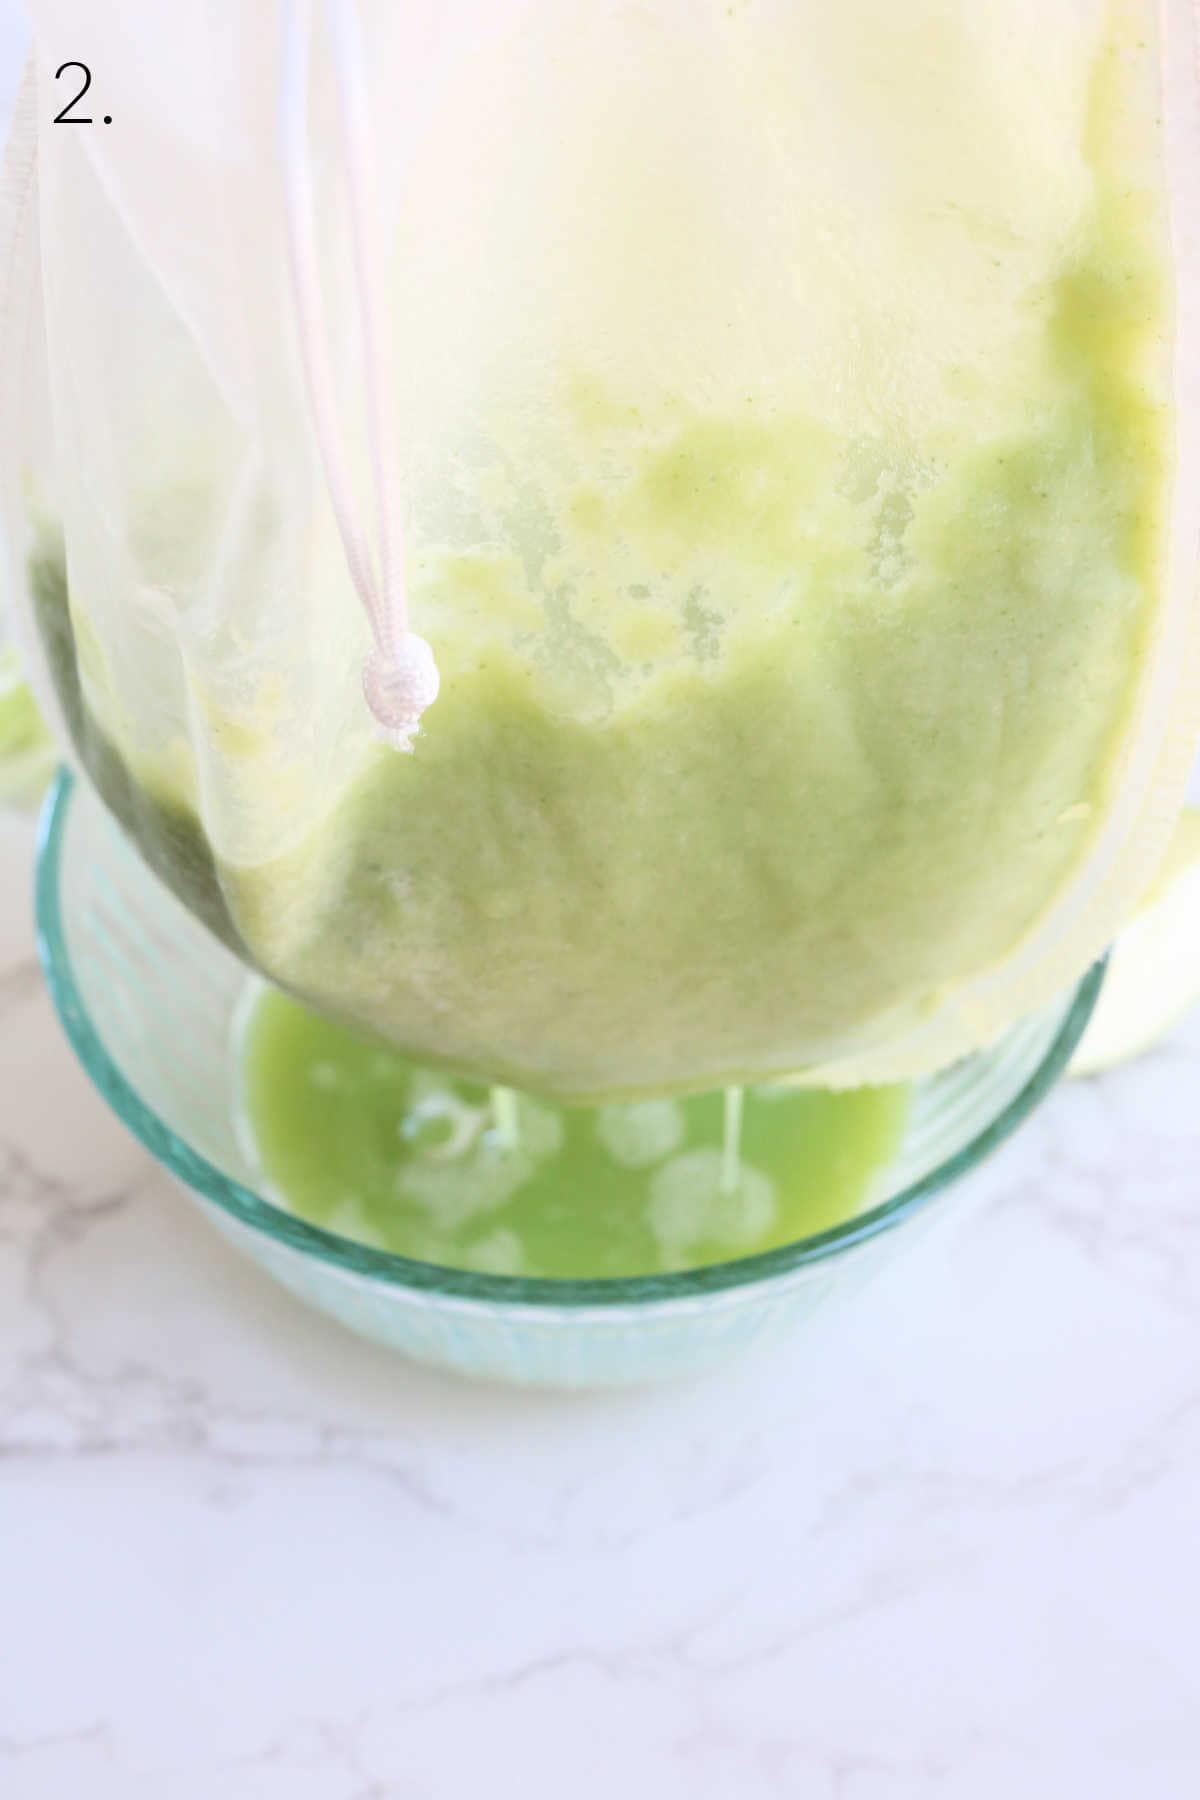 Homemade green juice in a blender squeezing out of a nut bag into a glass bowl.